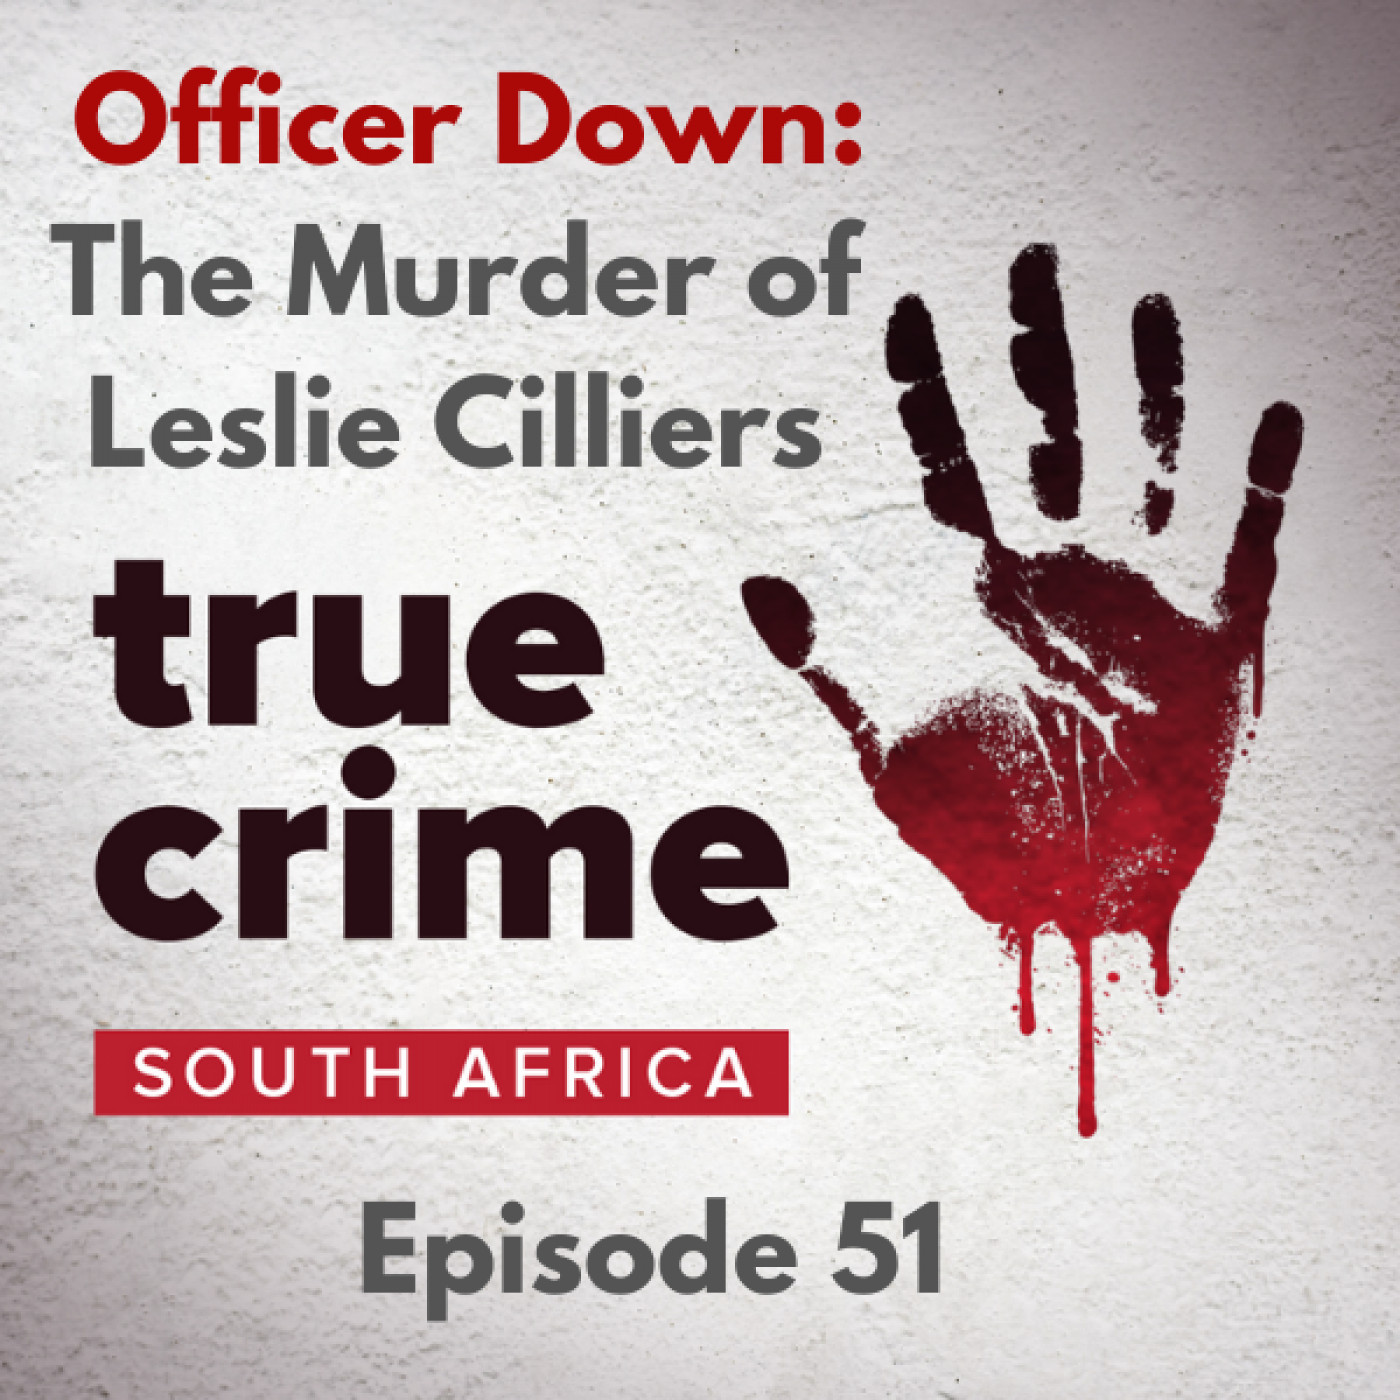 Episode 51 - Officer Down: The Murder of Leslie Cilliers